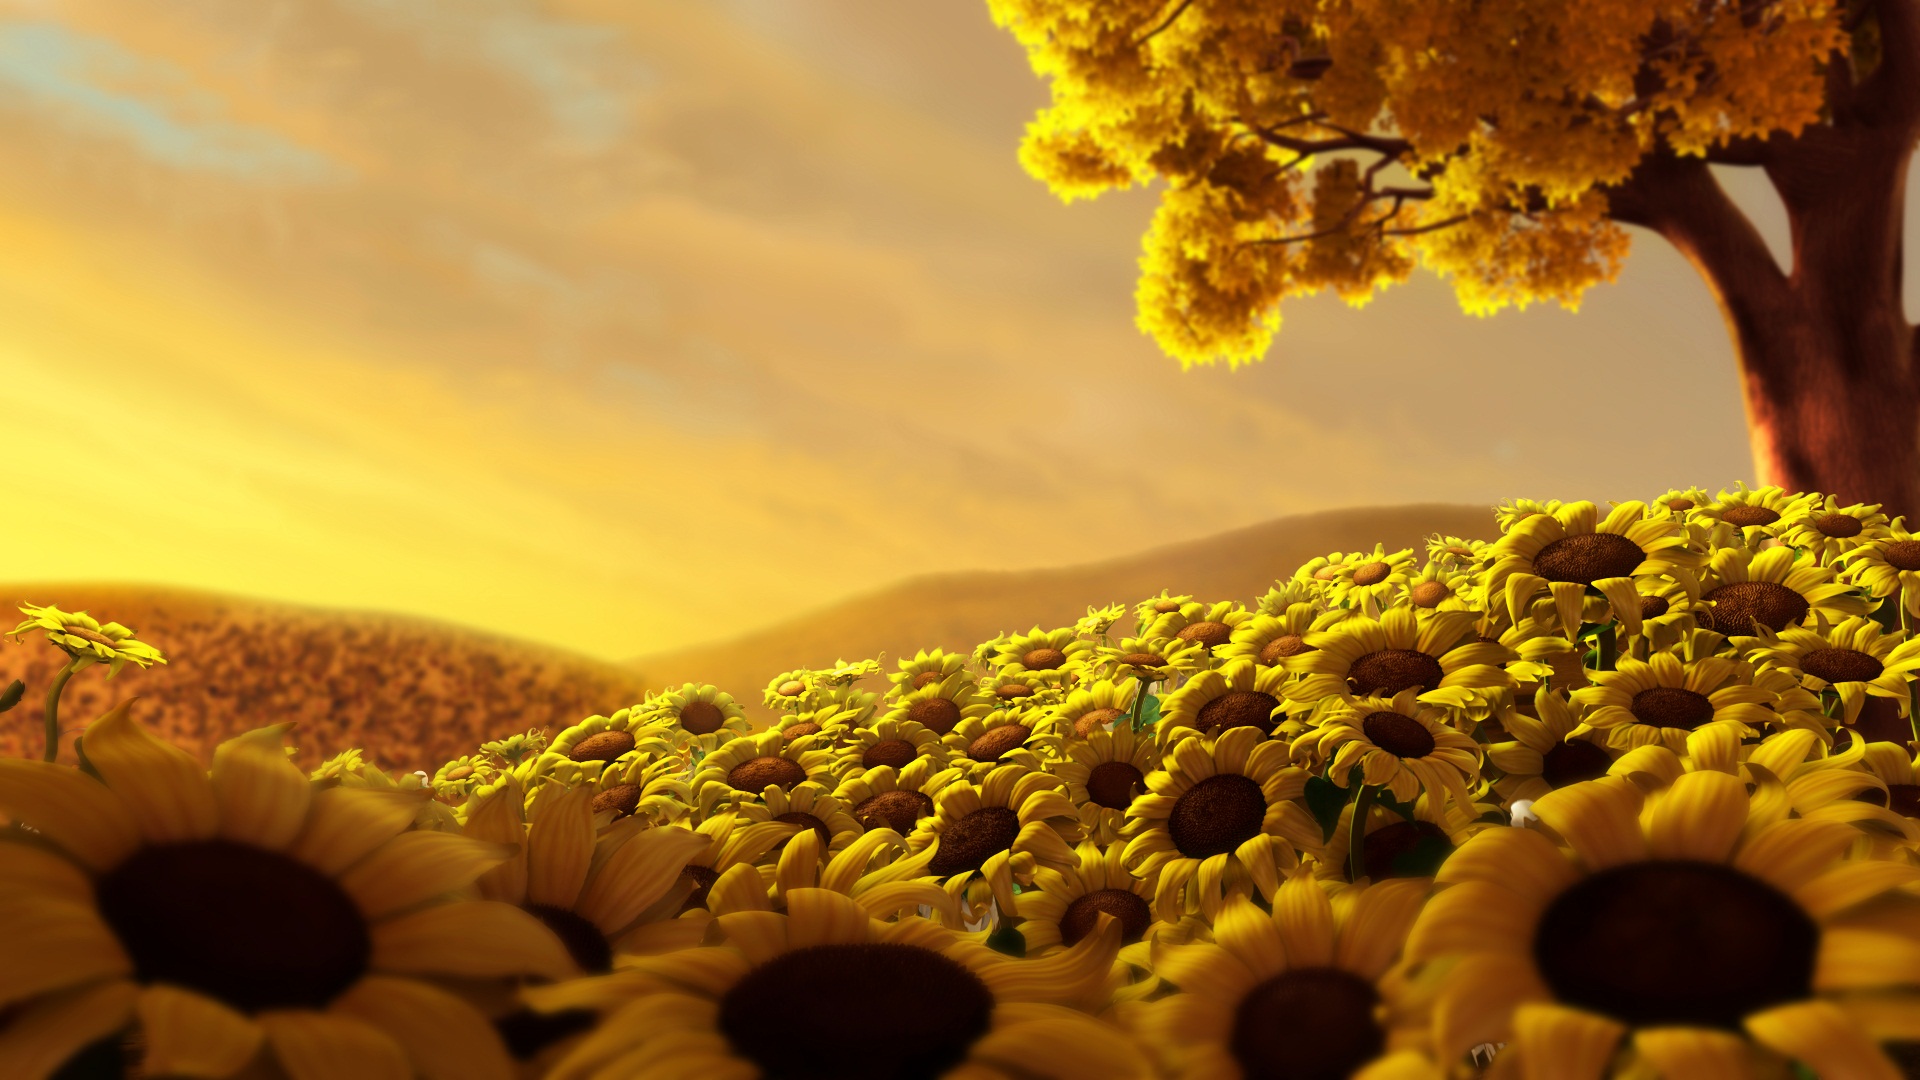 Scenery Wallpaper Presents A Sun Flower World All The Flowers